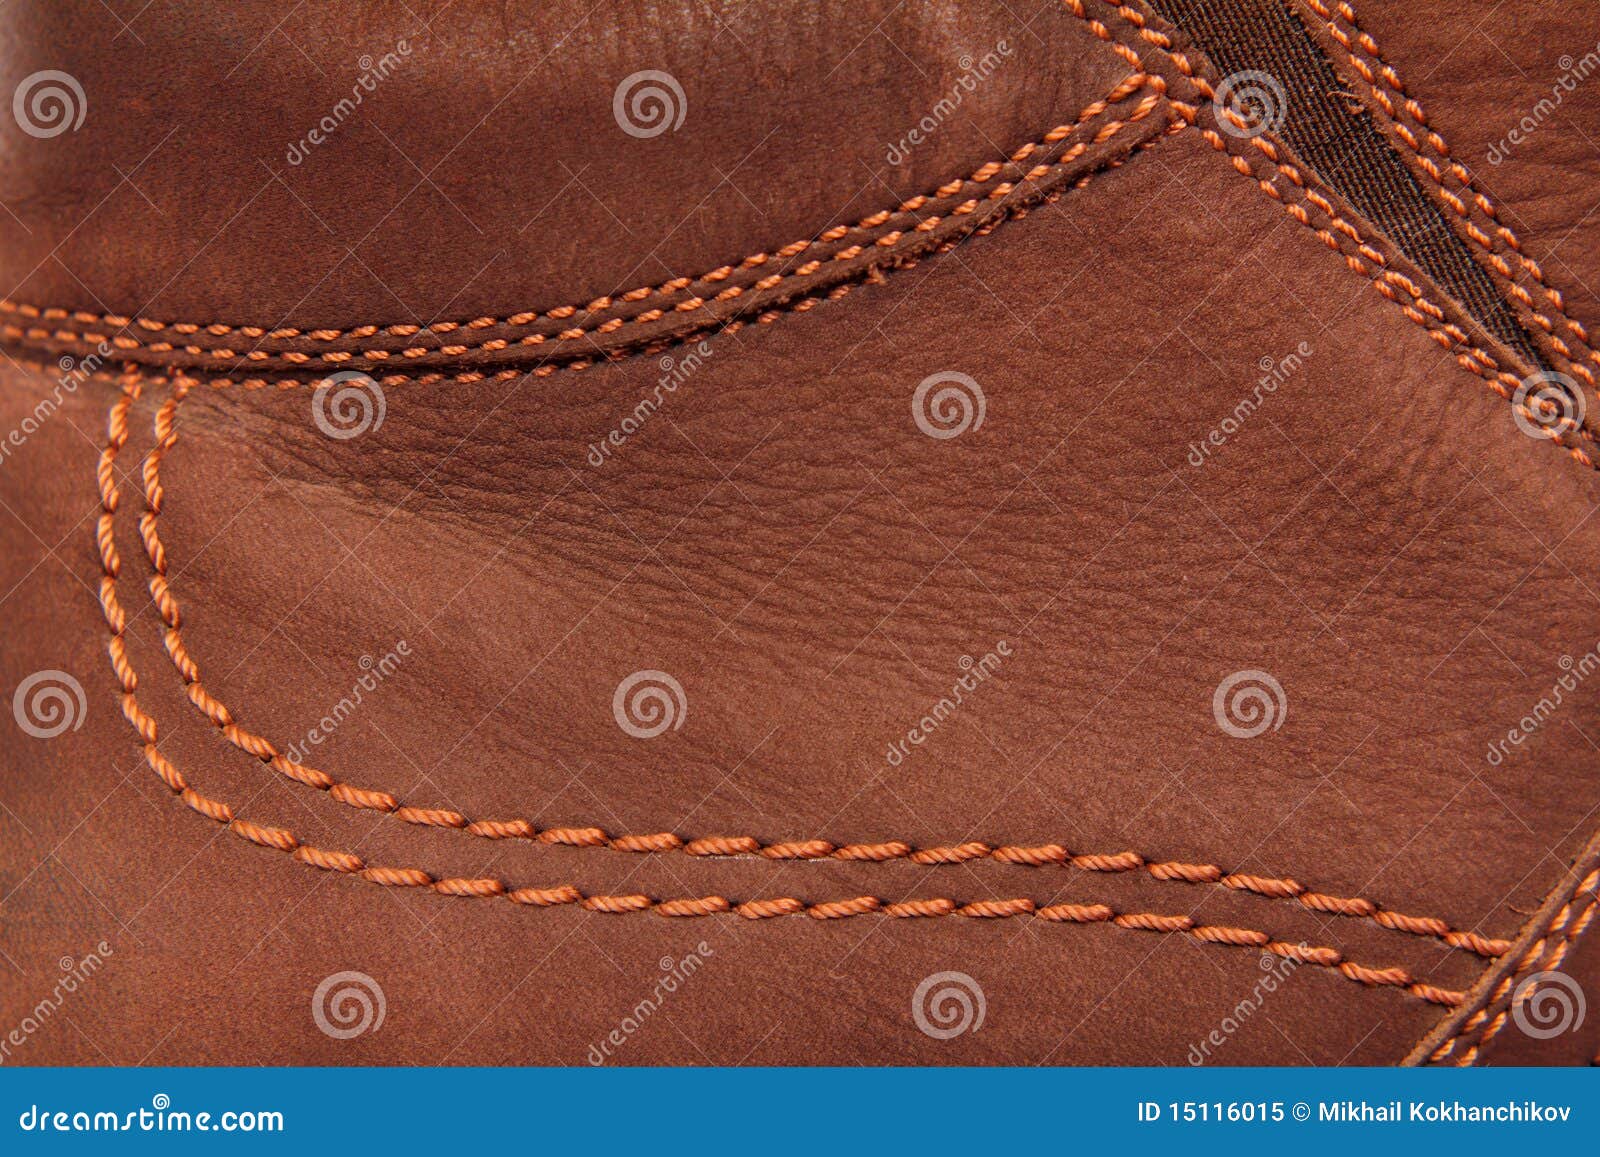 Brown leather suede stock image. Image of industry, textured - 15116015